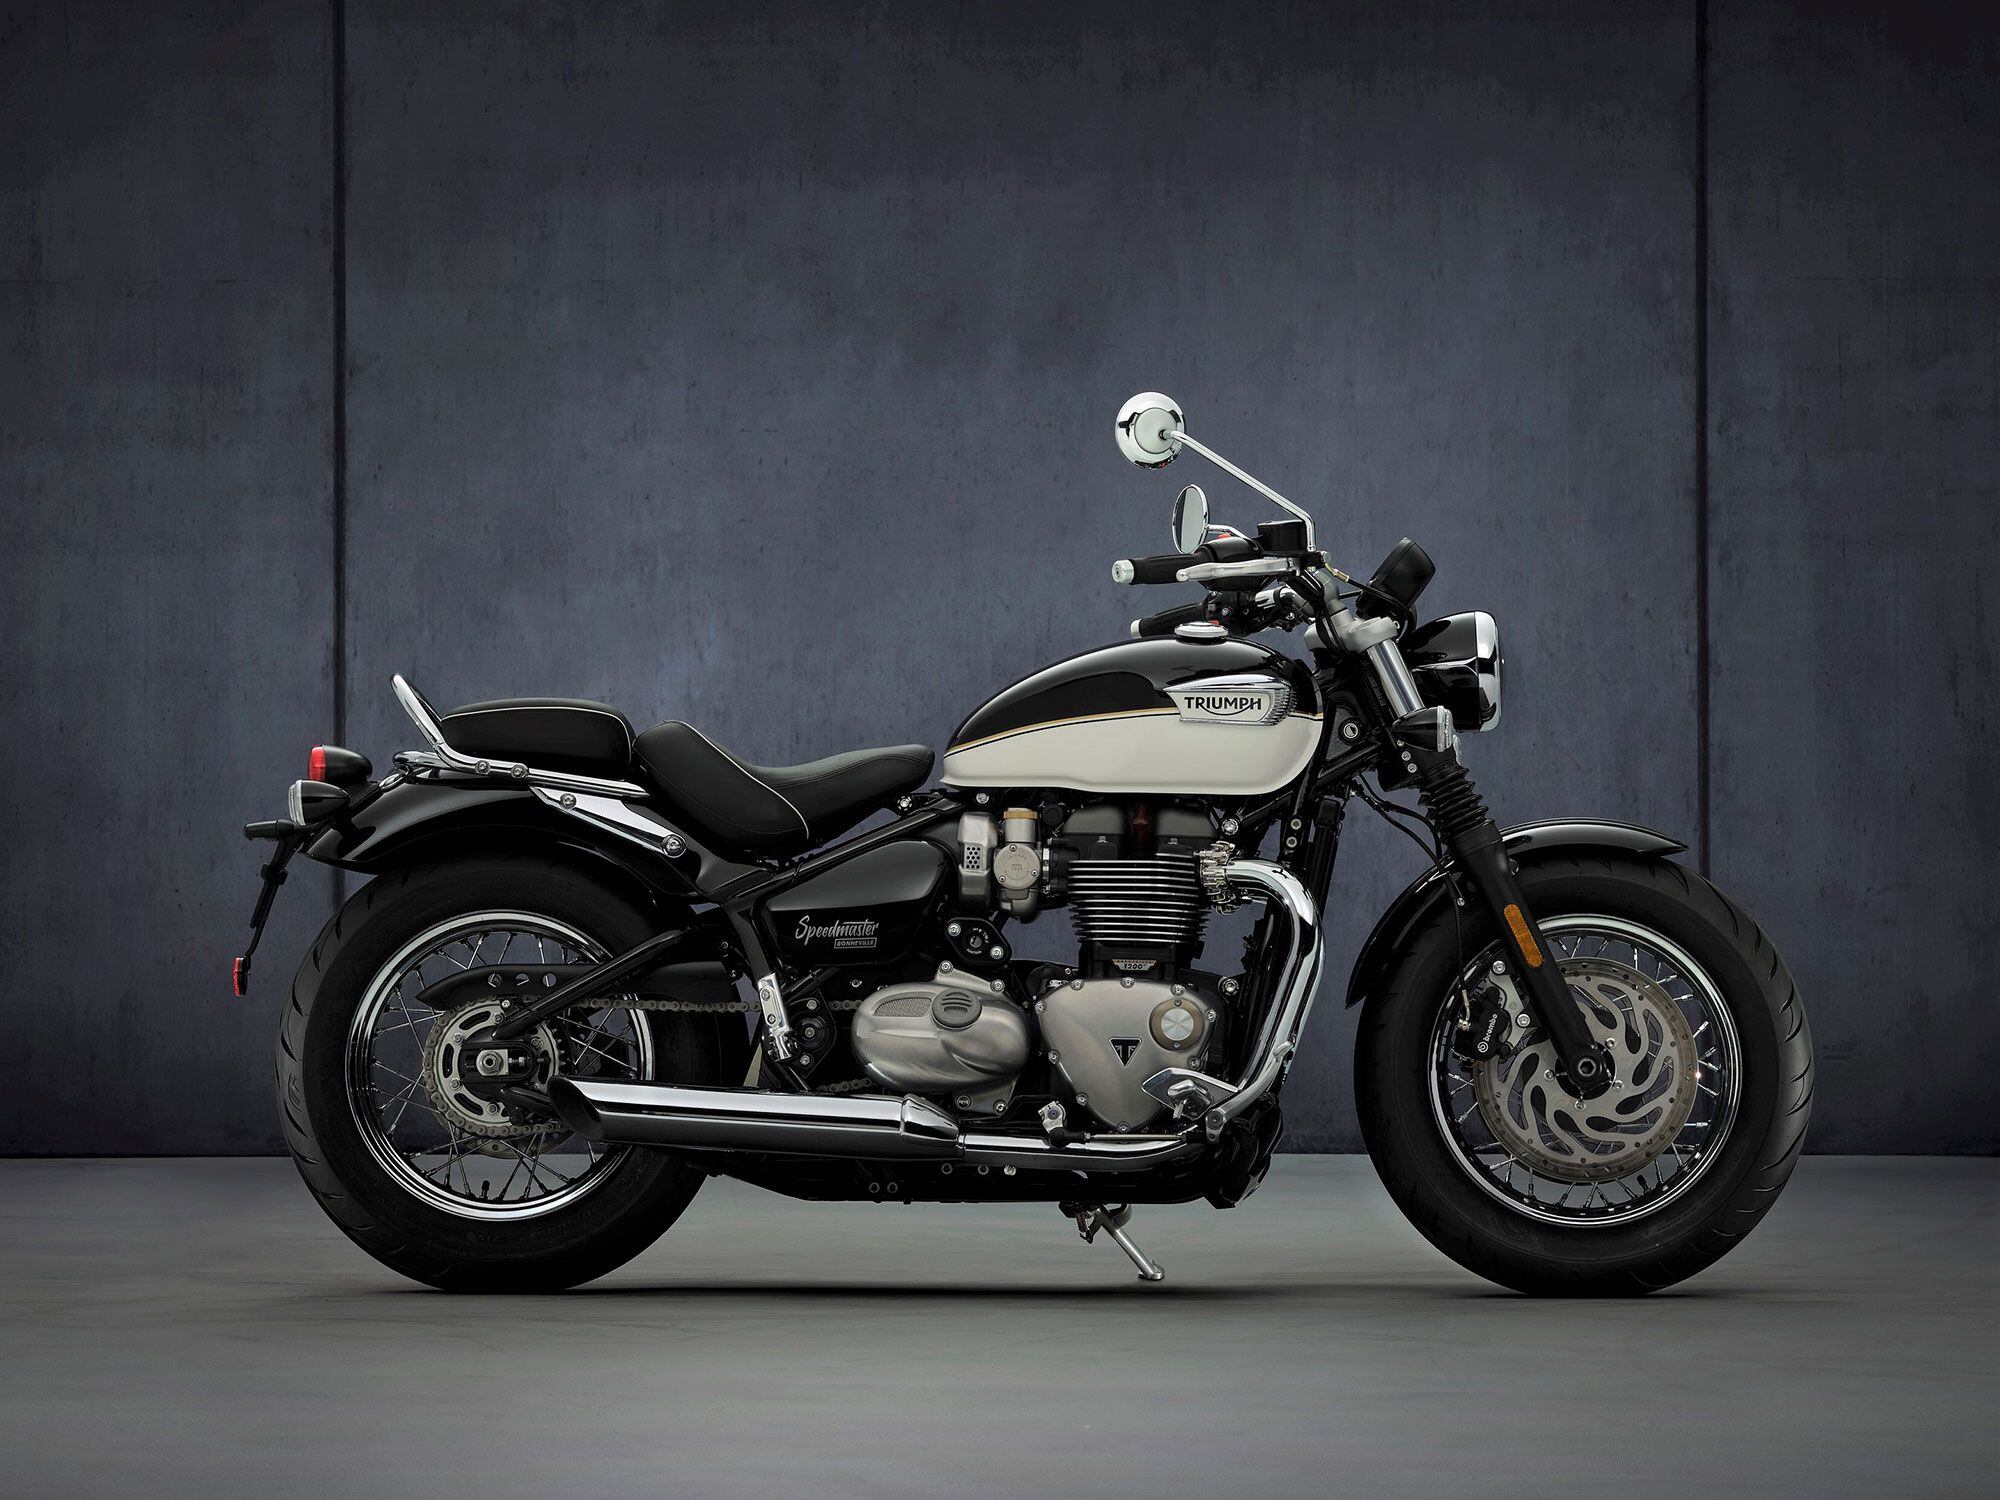 The Speedmaster cruiser also refines engine response, adds a 47mm fork, and revamps the seat for more comfort.